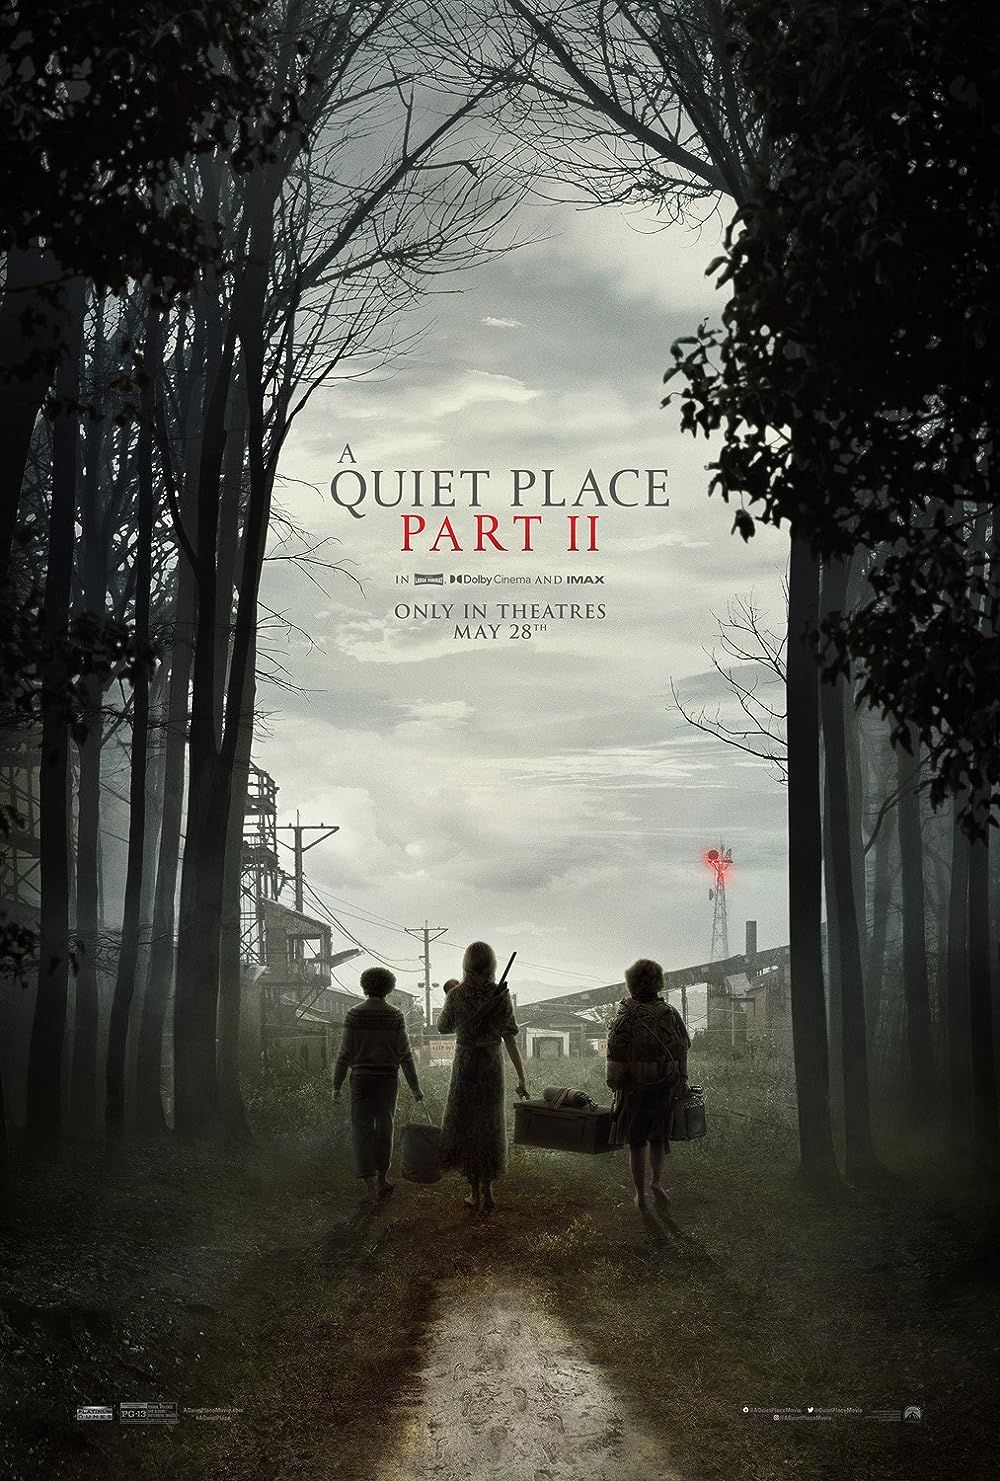 The Abbott Family Heads to the City on the A Quiet Place Part II Poster